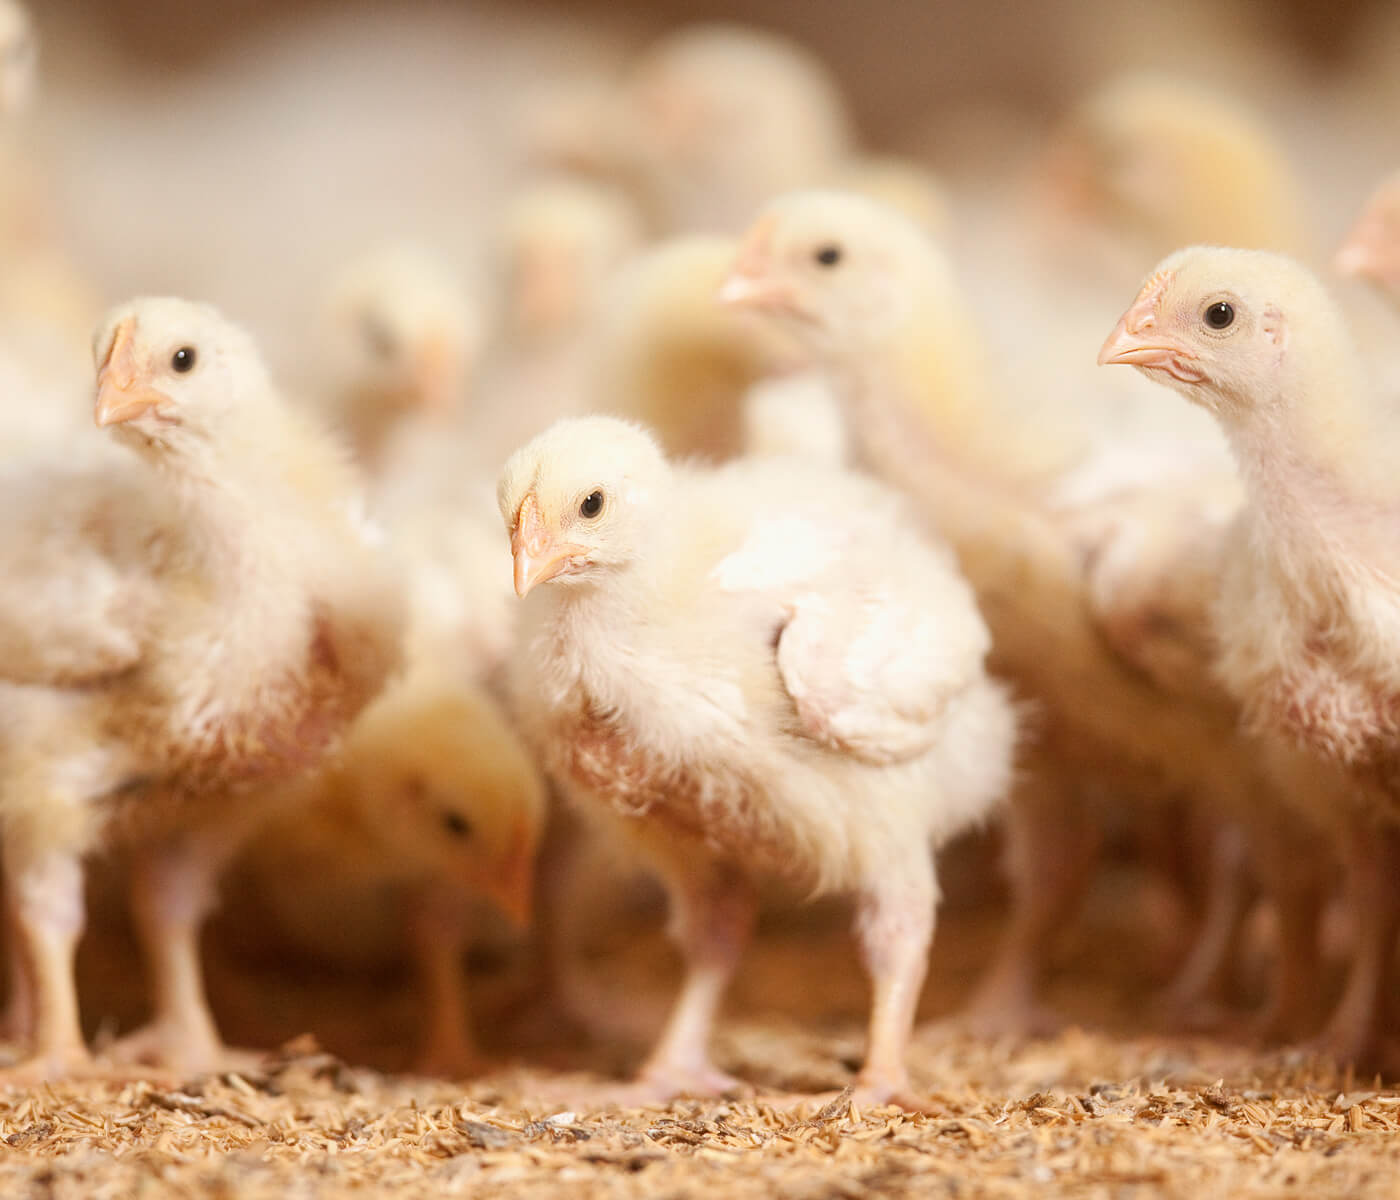 From farm to fork: The importance animal welfare and sustainability